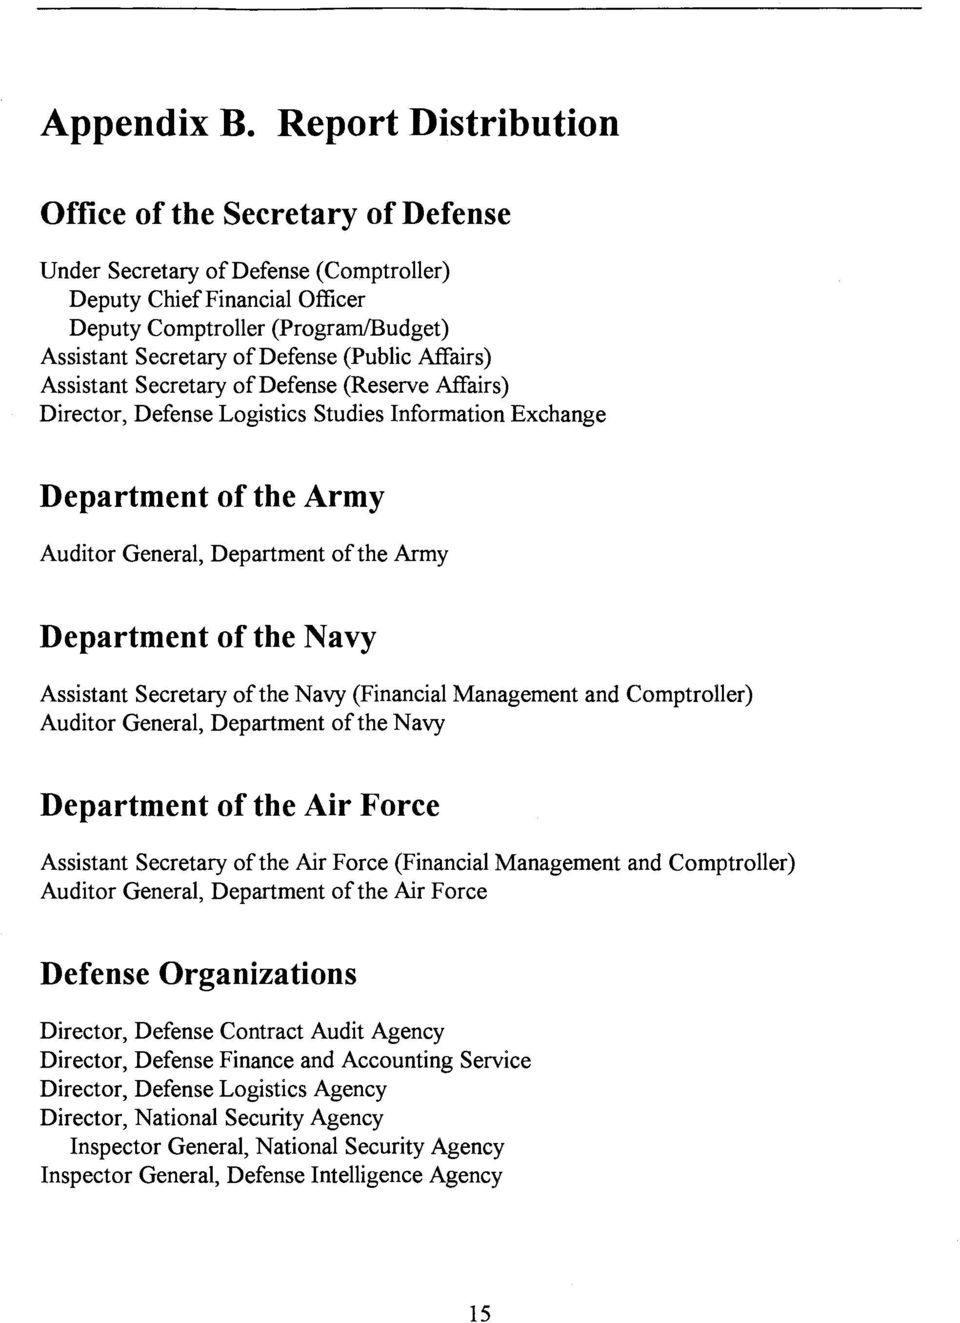 (Public Affairs) Assistant Secretary of Defense (Reserve Affairs) Director, Defense Logistics Studies Information Exchange Department of the Army Auditor General, Department ofthe Army Department of